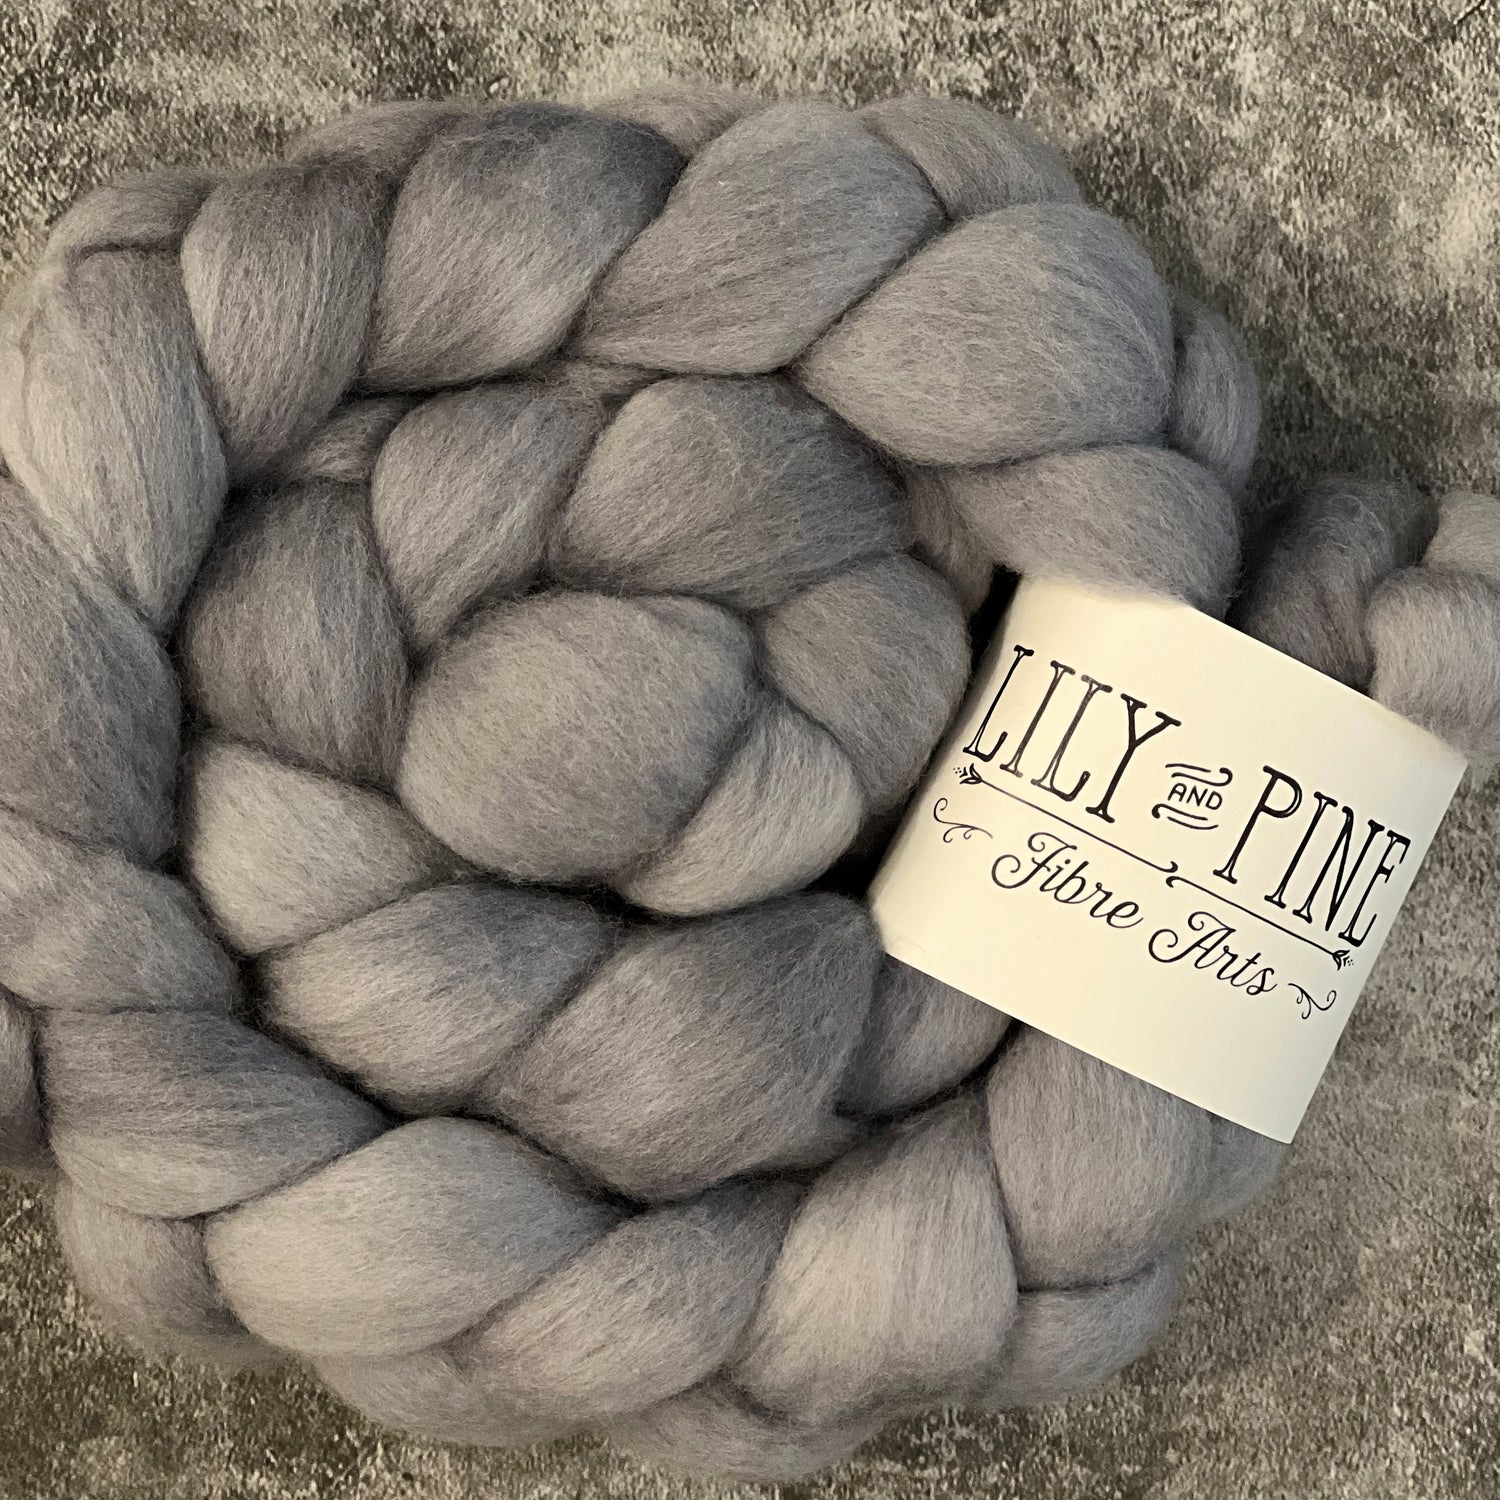 Lily & Pine Combed Top Roving - SkeinAppeal